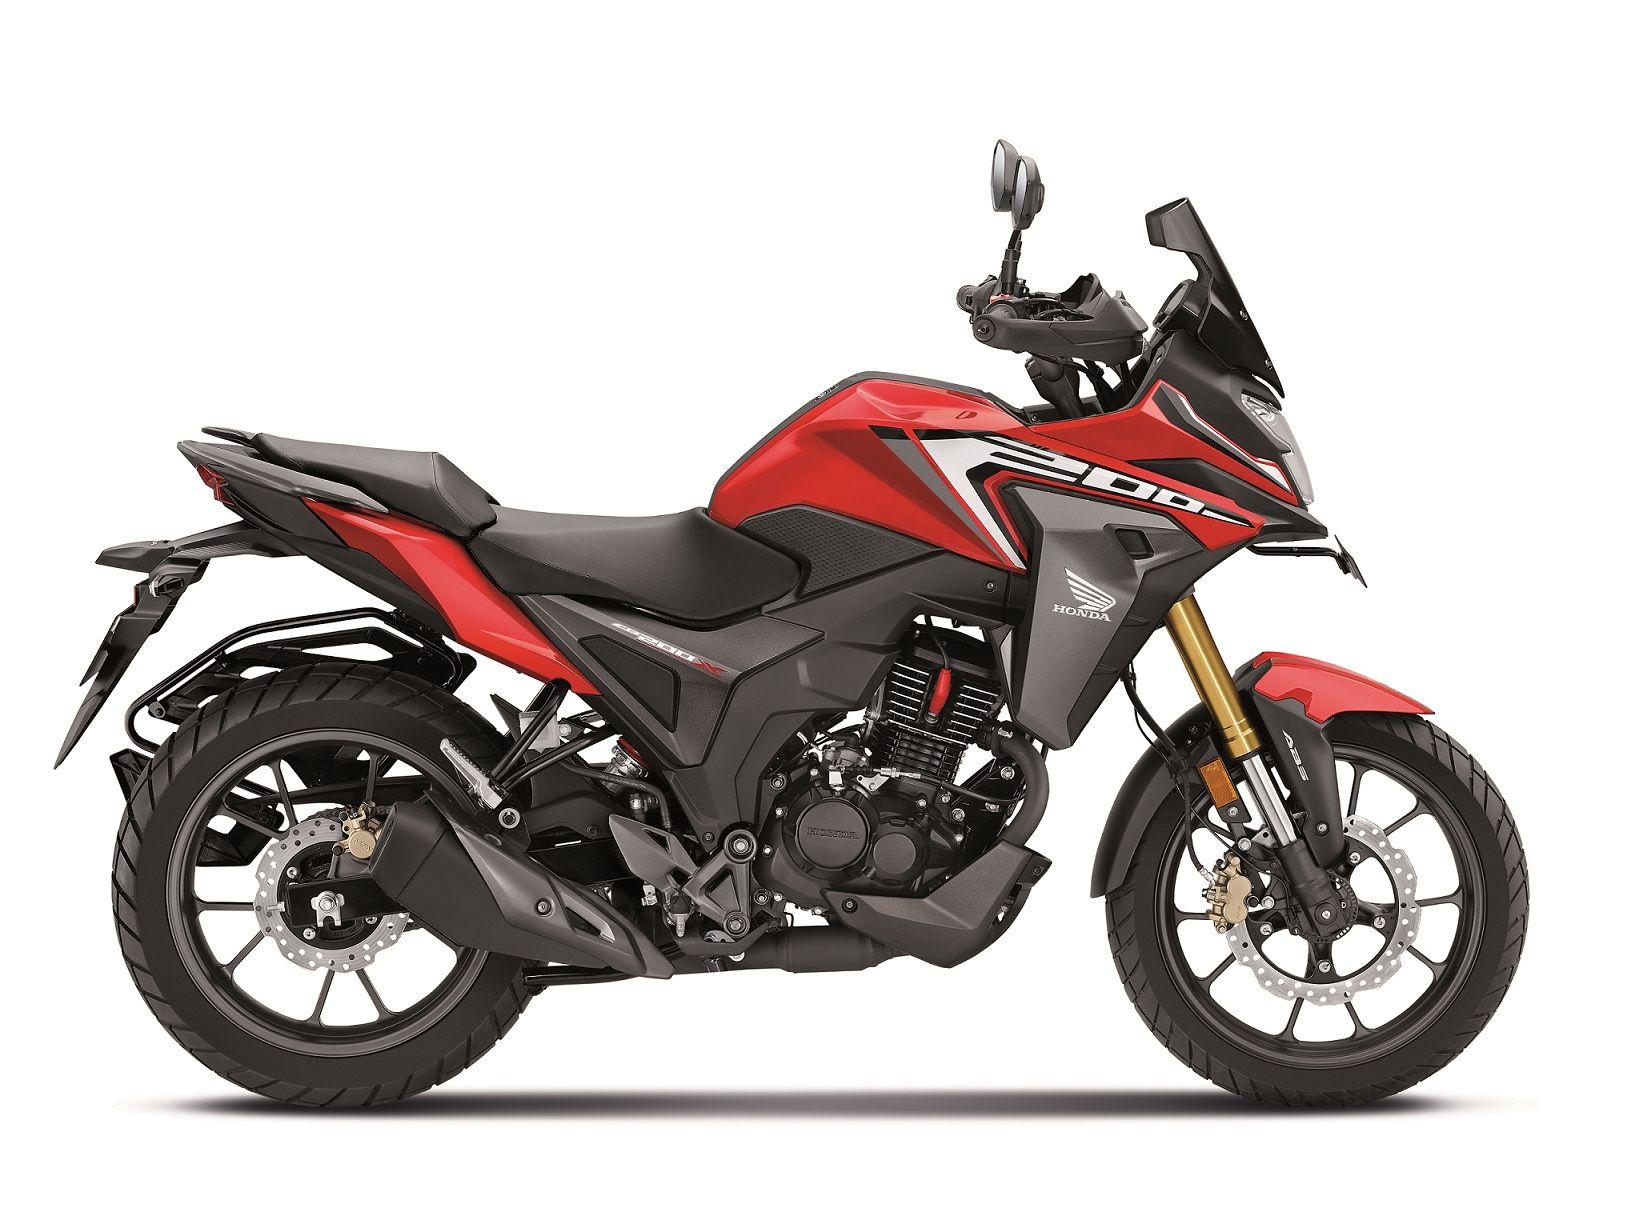 2023 Honda CB200X Launched In India; Priced At Rs. 1.47 Lakh